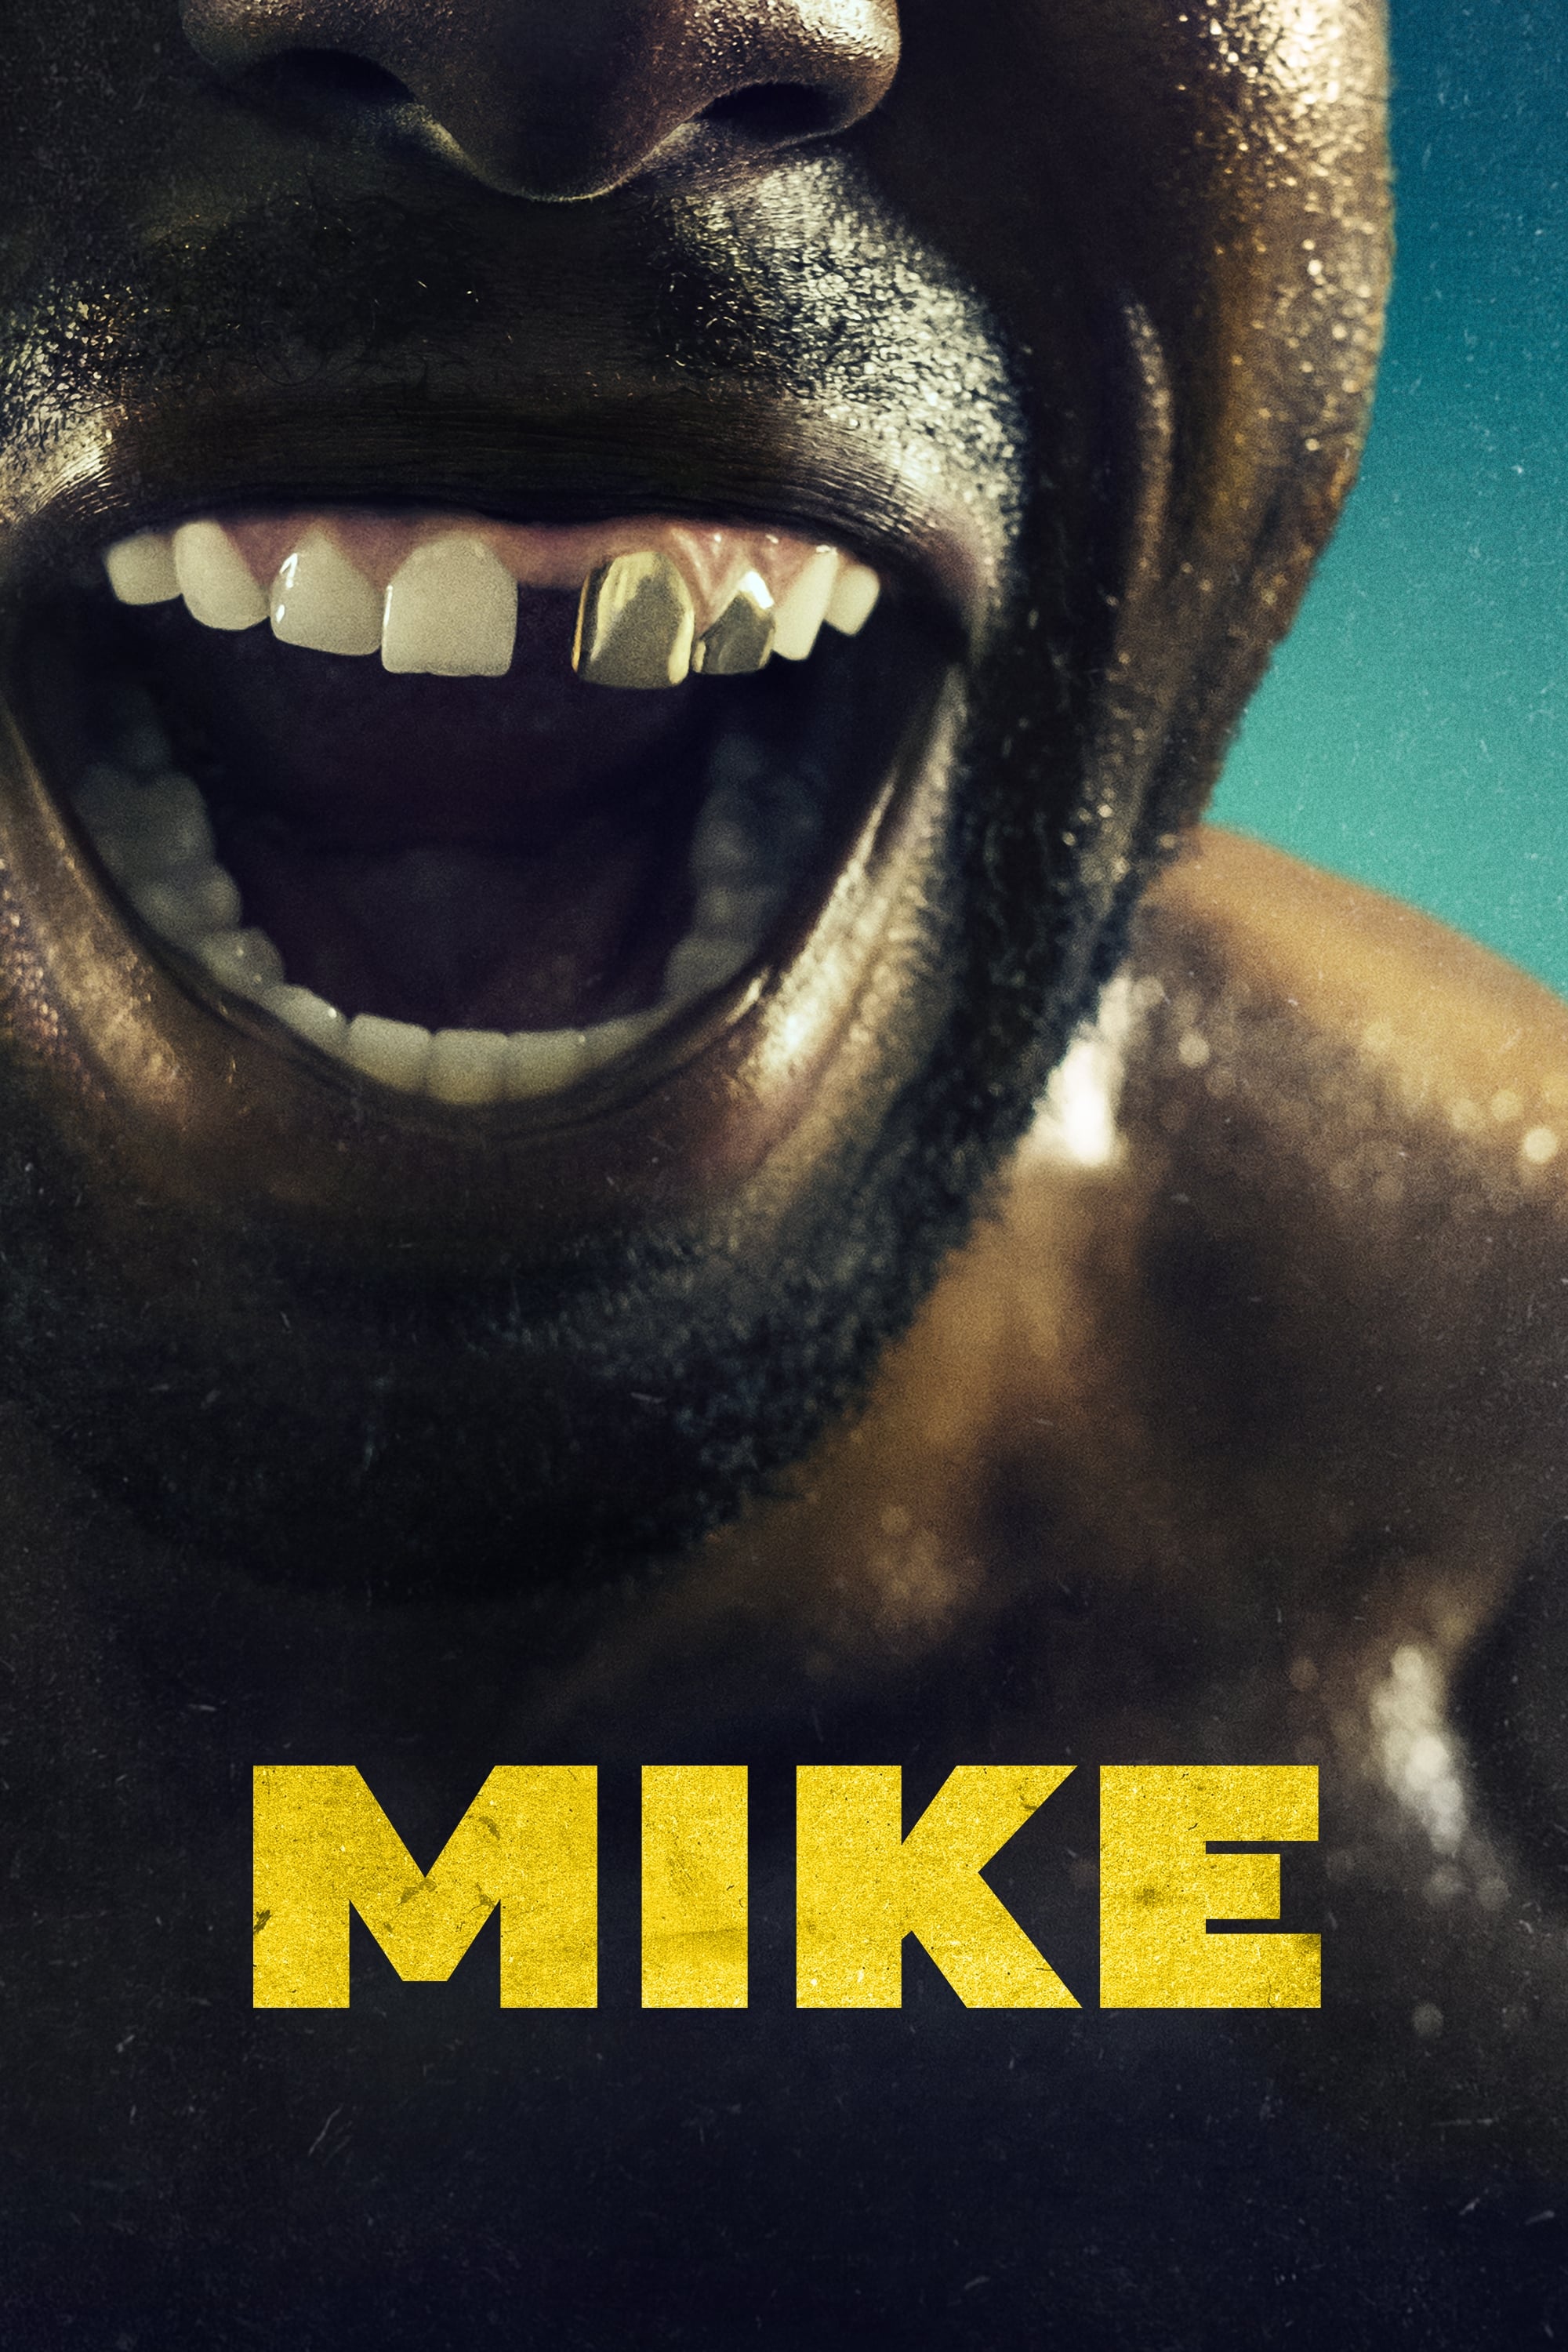 Mike TV Shows About Based On True Story